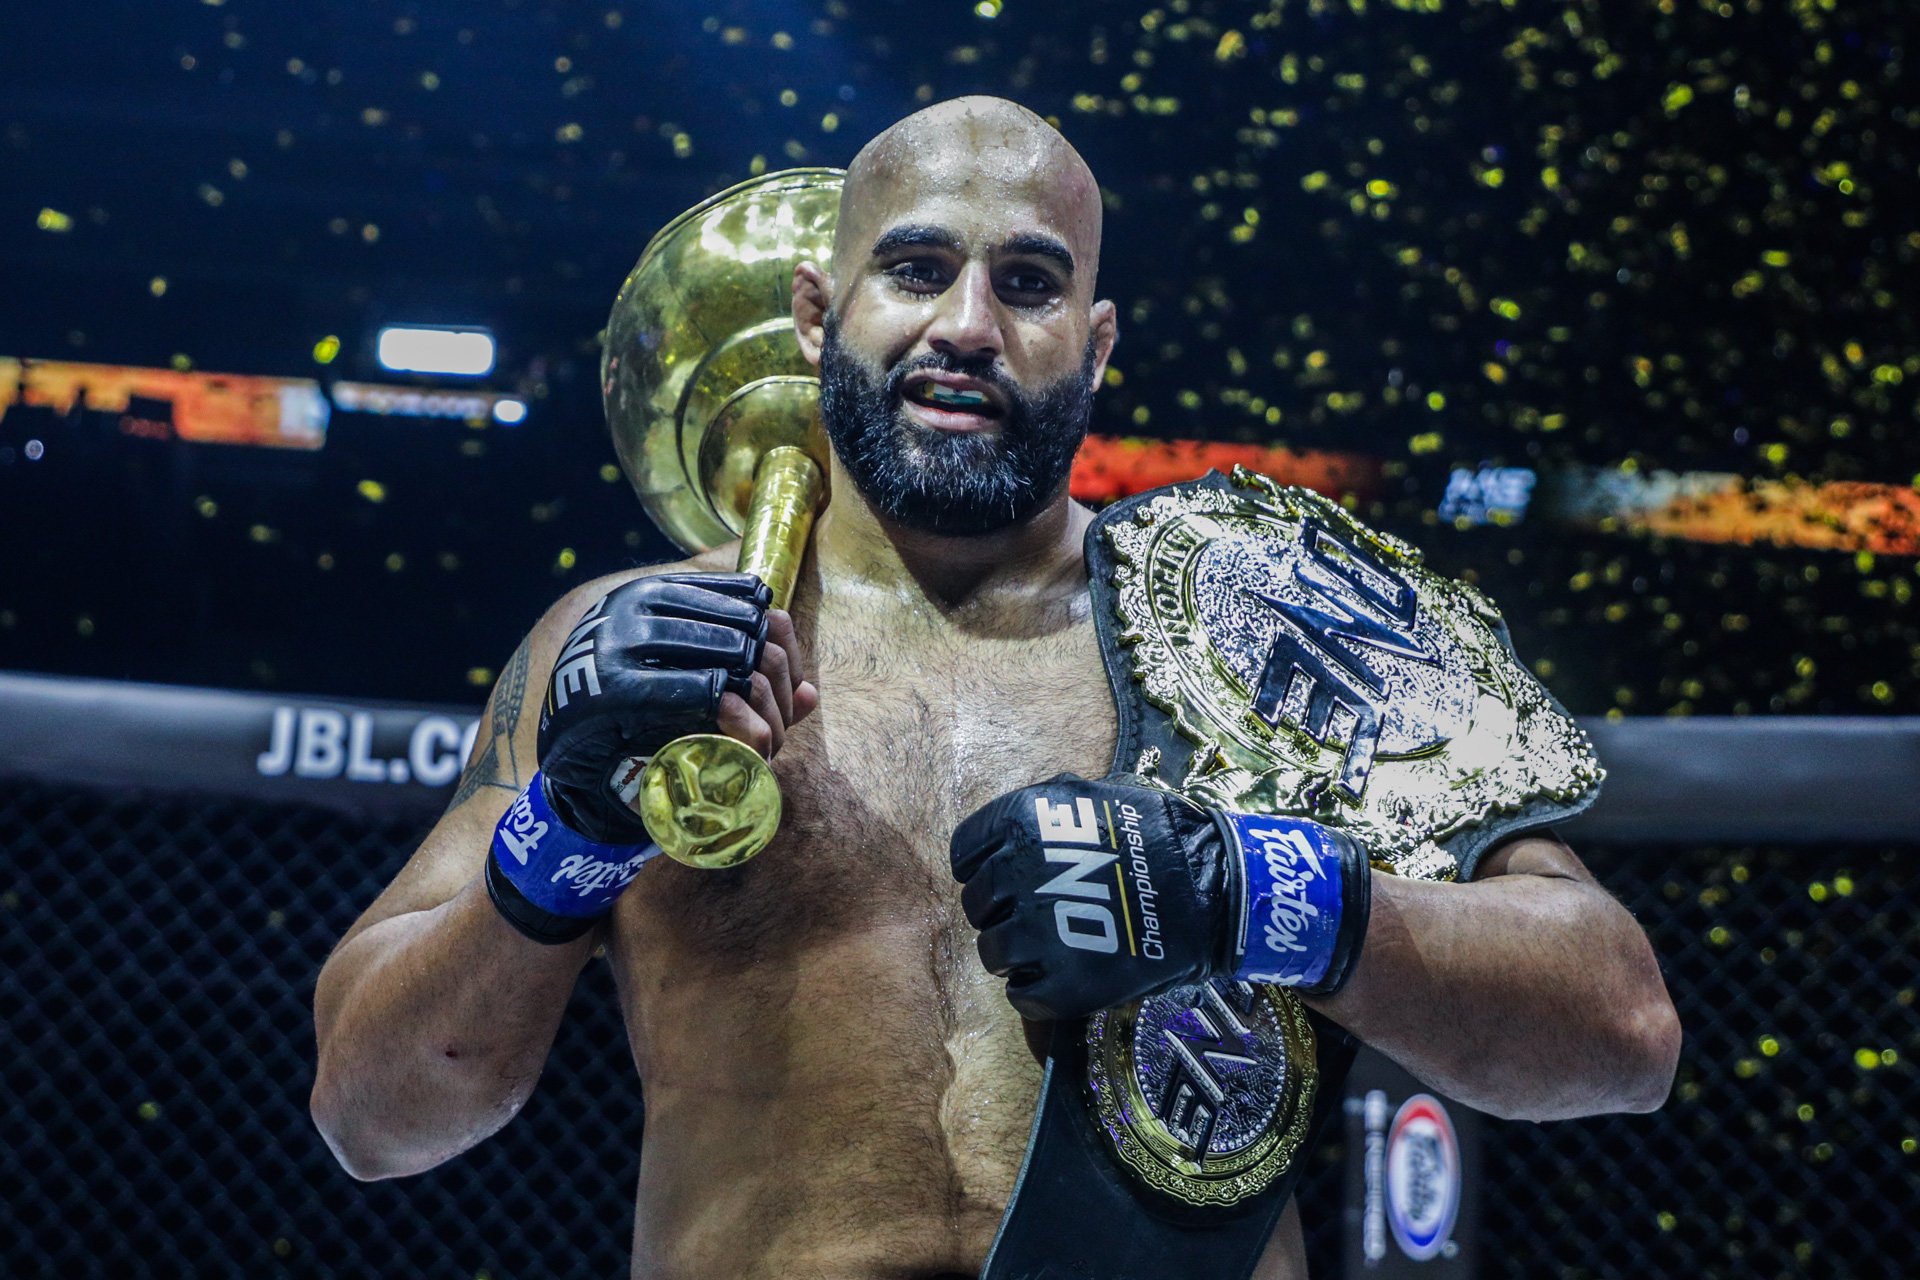 renere Klinik Rund ONE Championship sets up interim heavyweight title fight after Arjan  Bhullar 'declines multiple offers' to defend belt | South China Morning Post